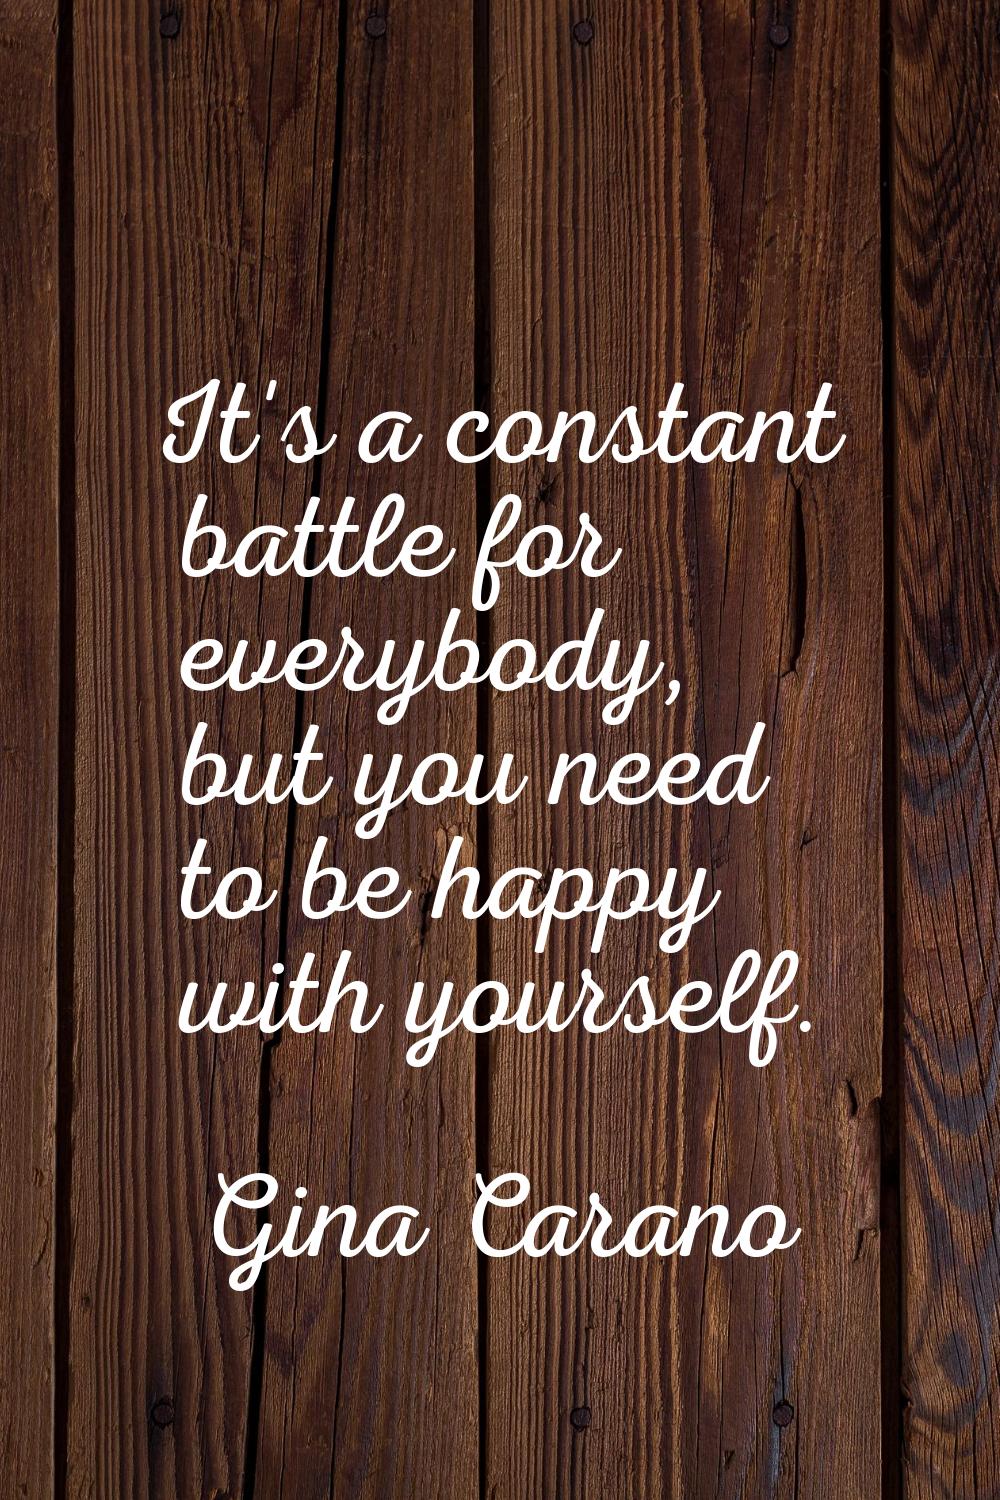 It's a constant battle for everybody, but you need to be happy with yourself.